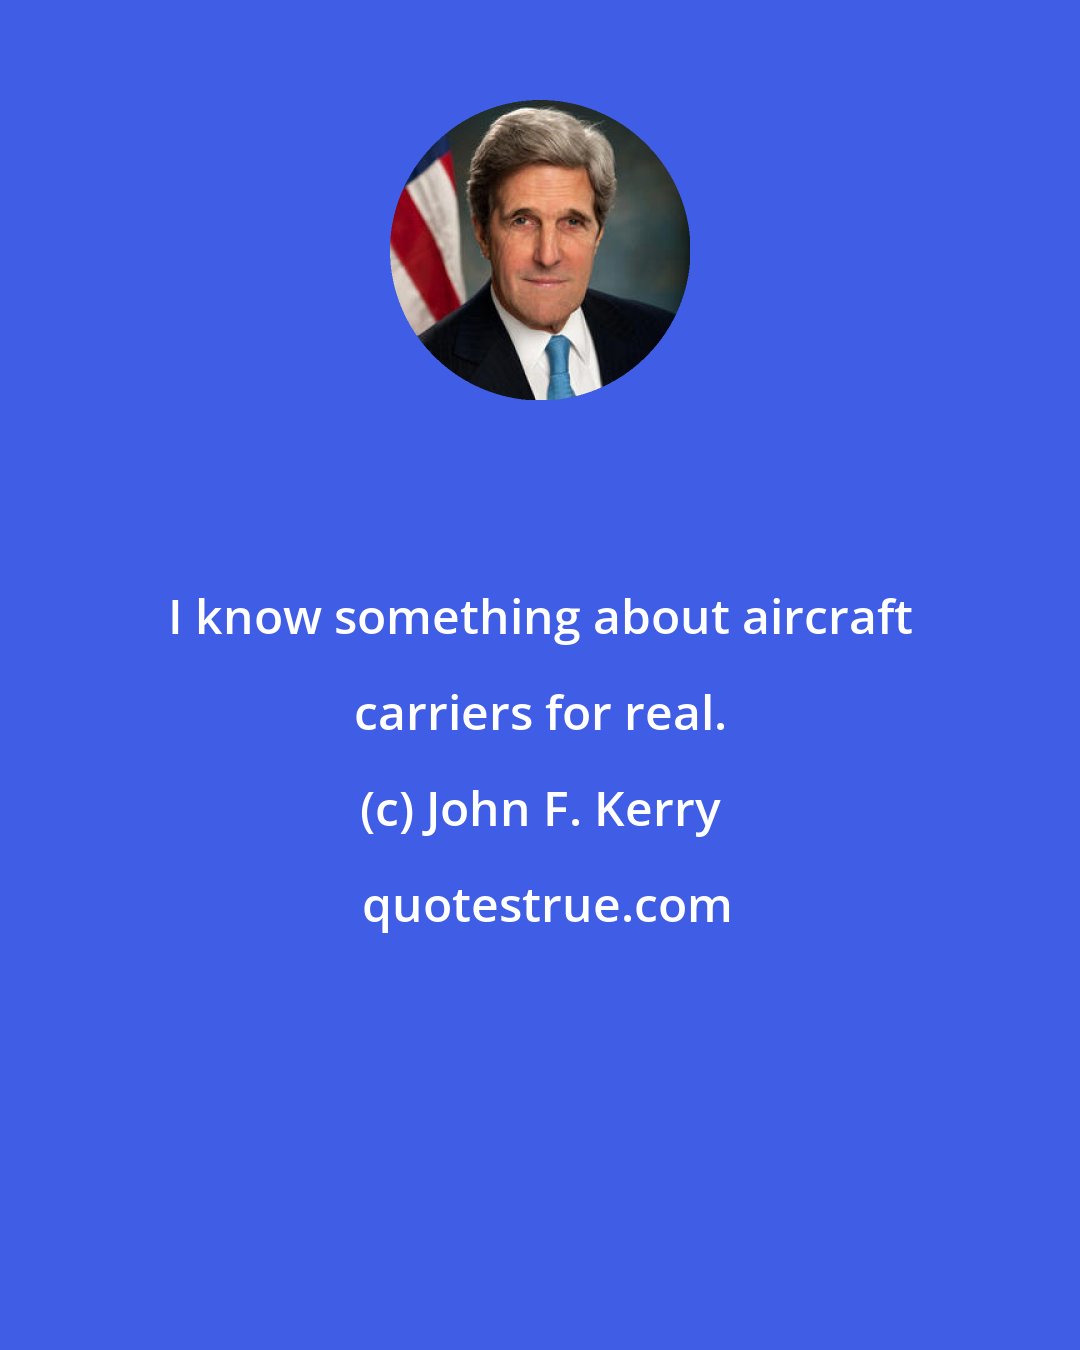 John F. Kerry: I know something about aircraft carriers for real.